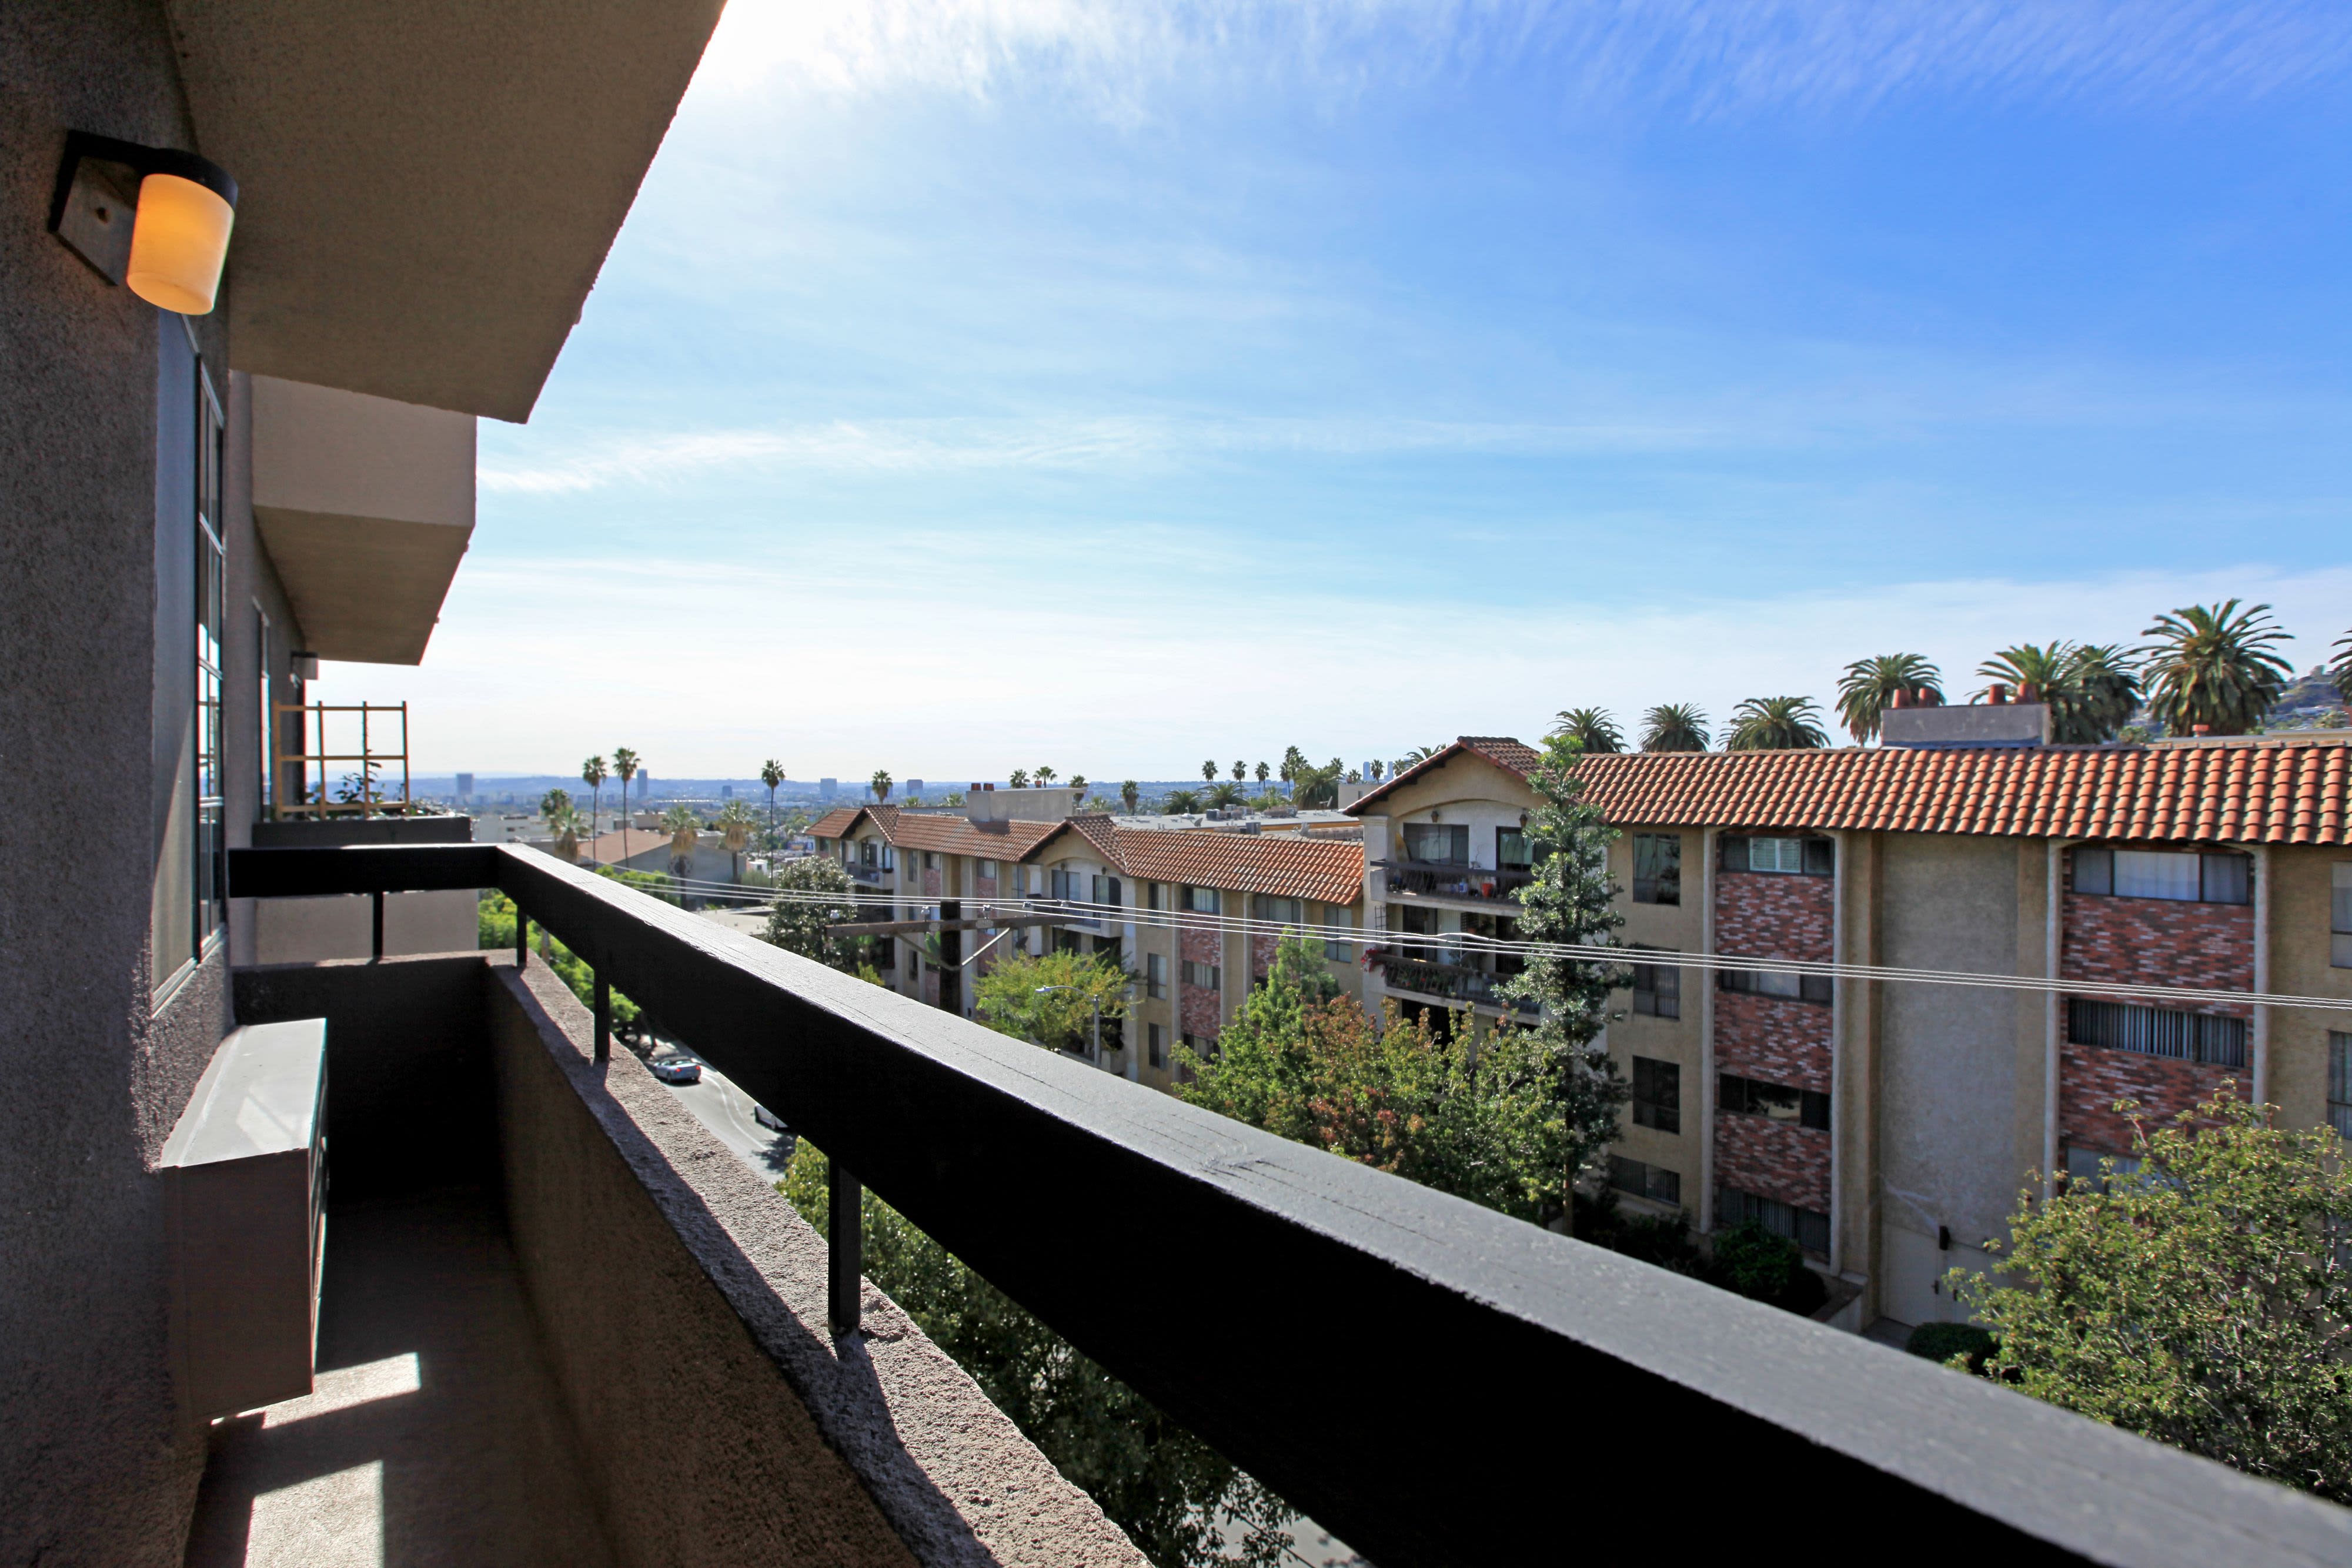 Beautiful from the balcony of Savoy West Apartments in Los Angeles, California